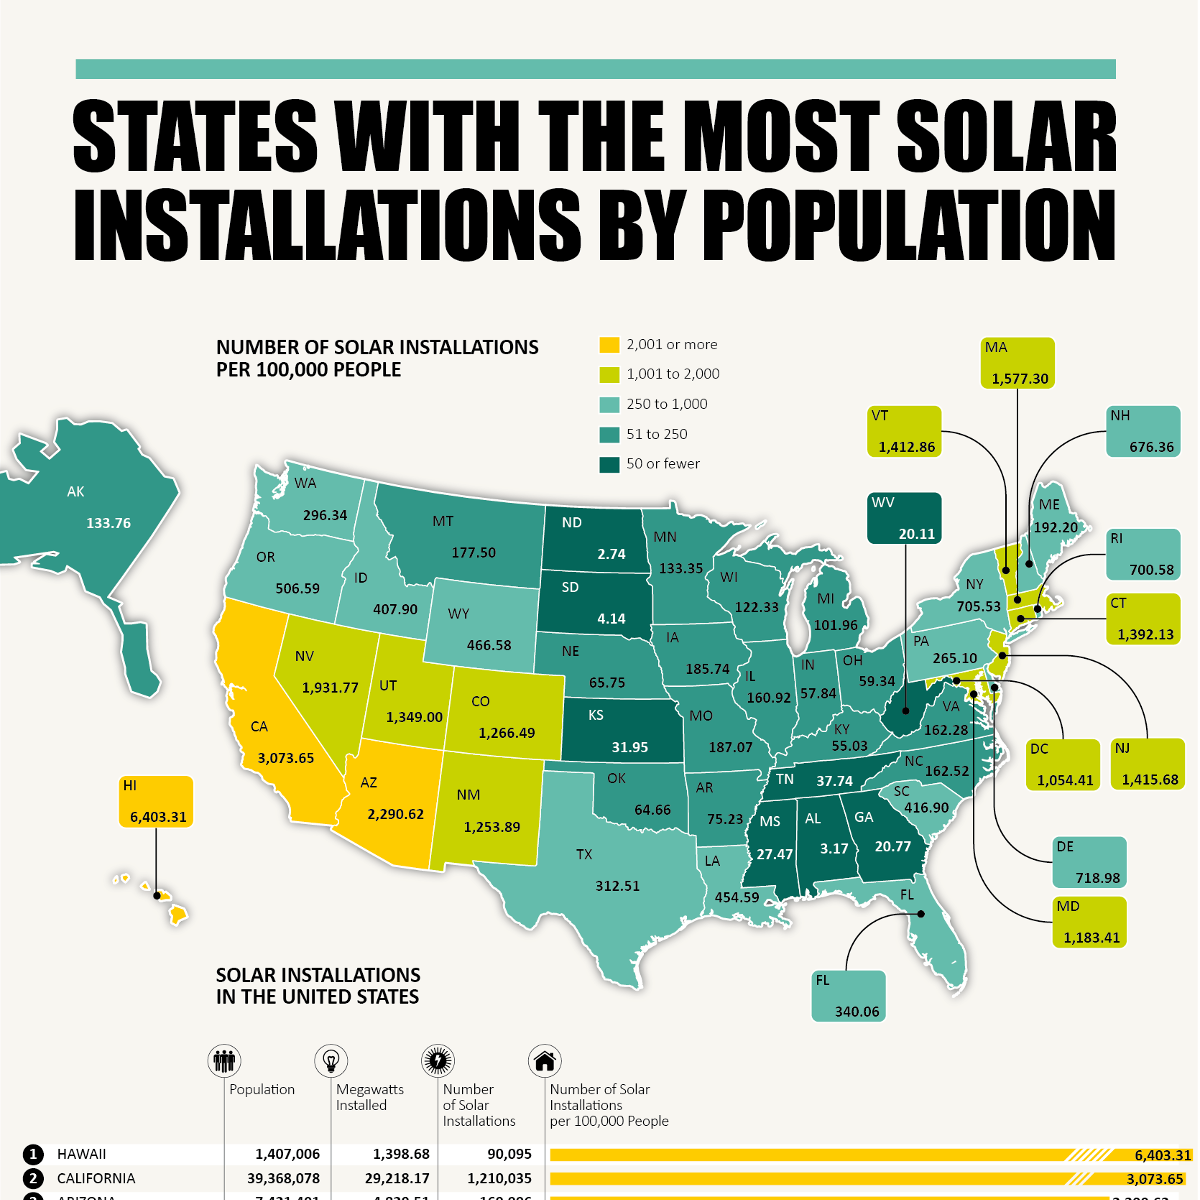 States With the Most Solar Installation by Population